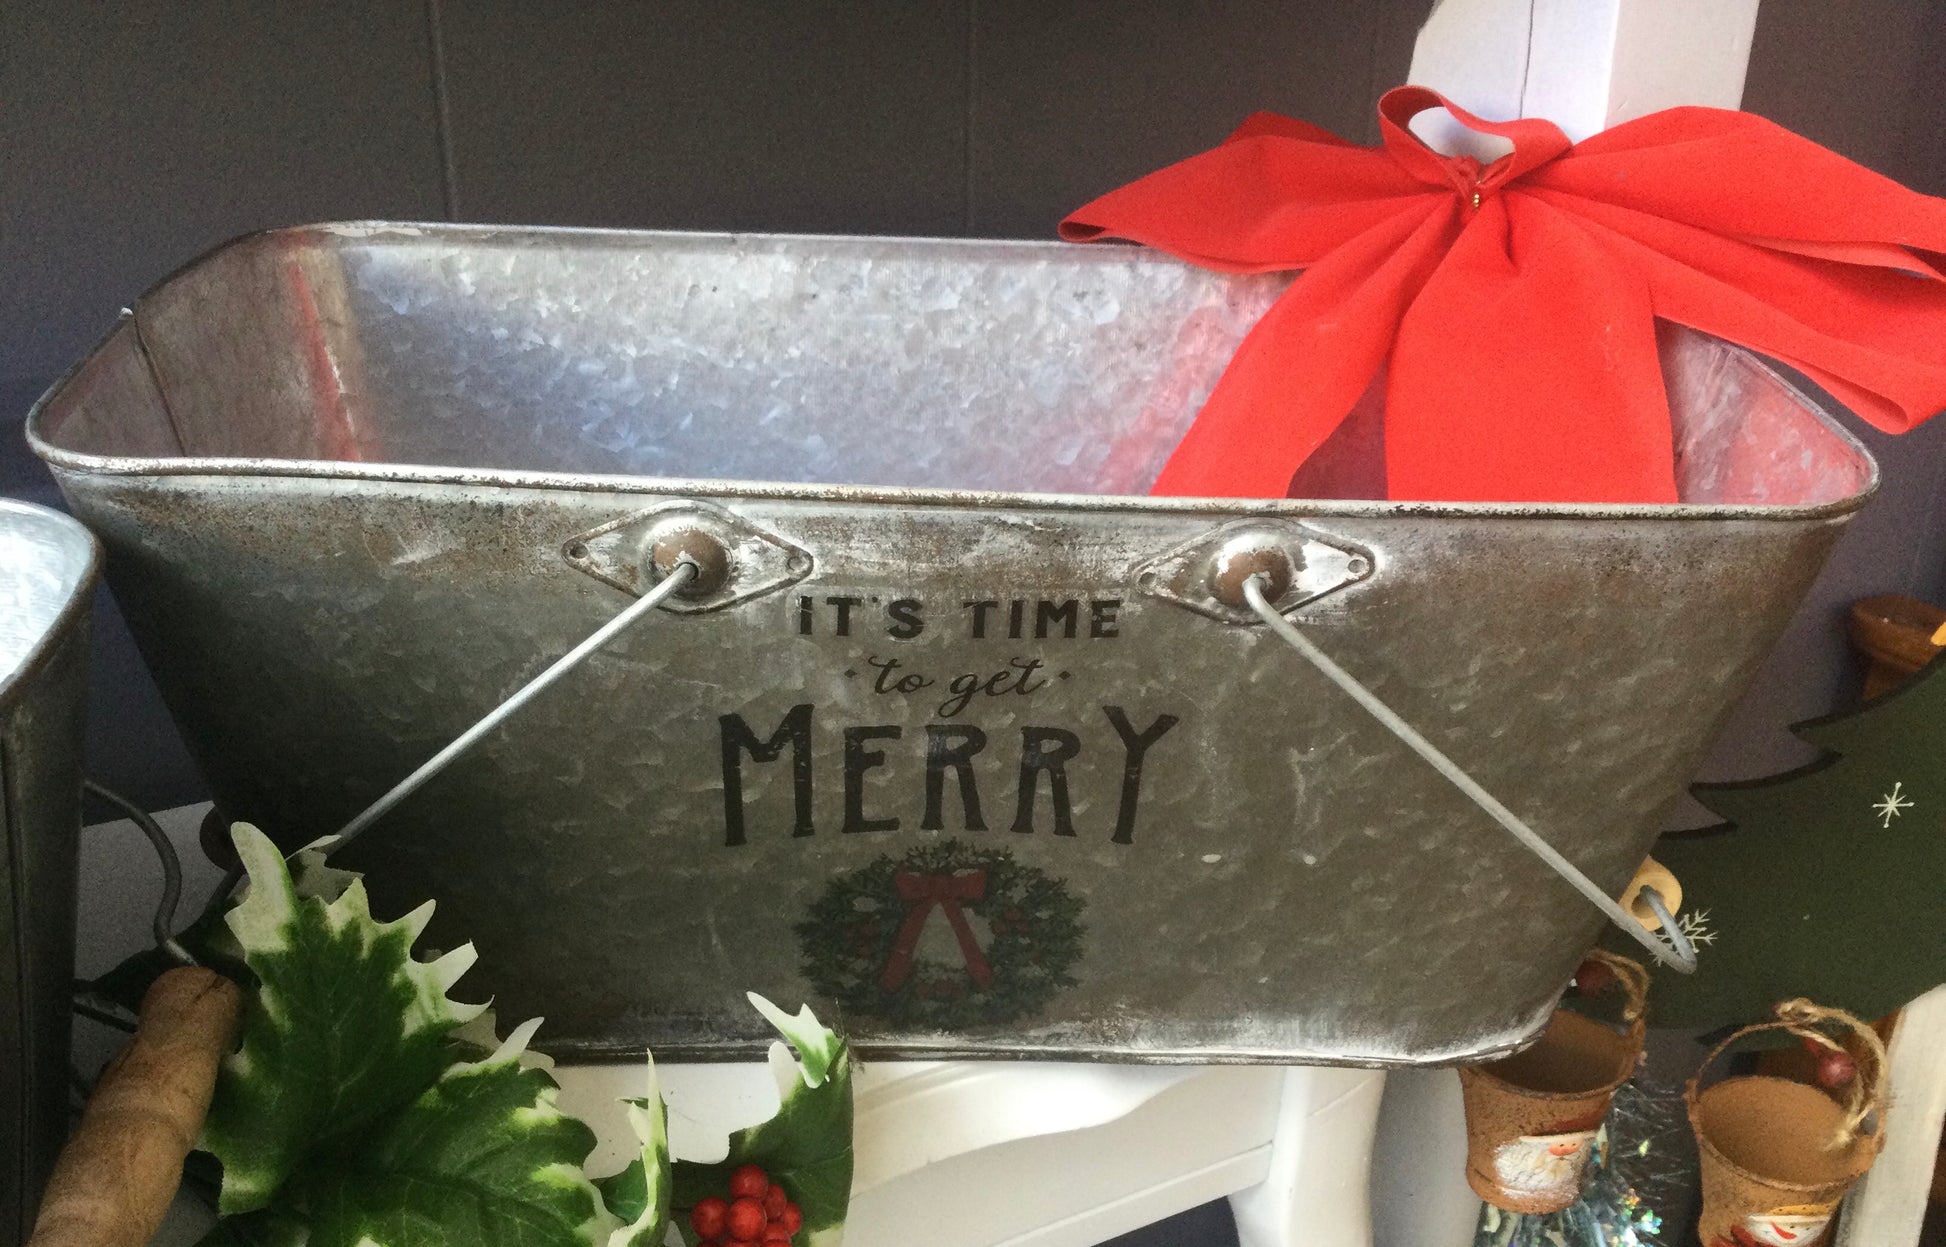 Rounded rectangle tin planter with wood handles. Red typography  “It’s Time to get Merry” 